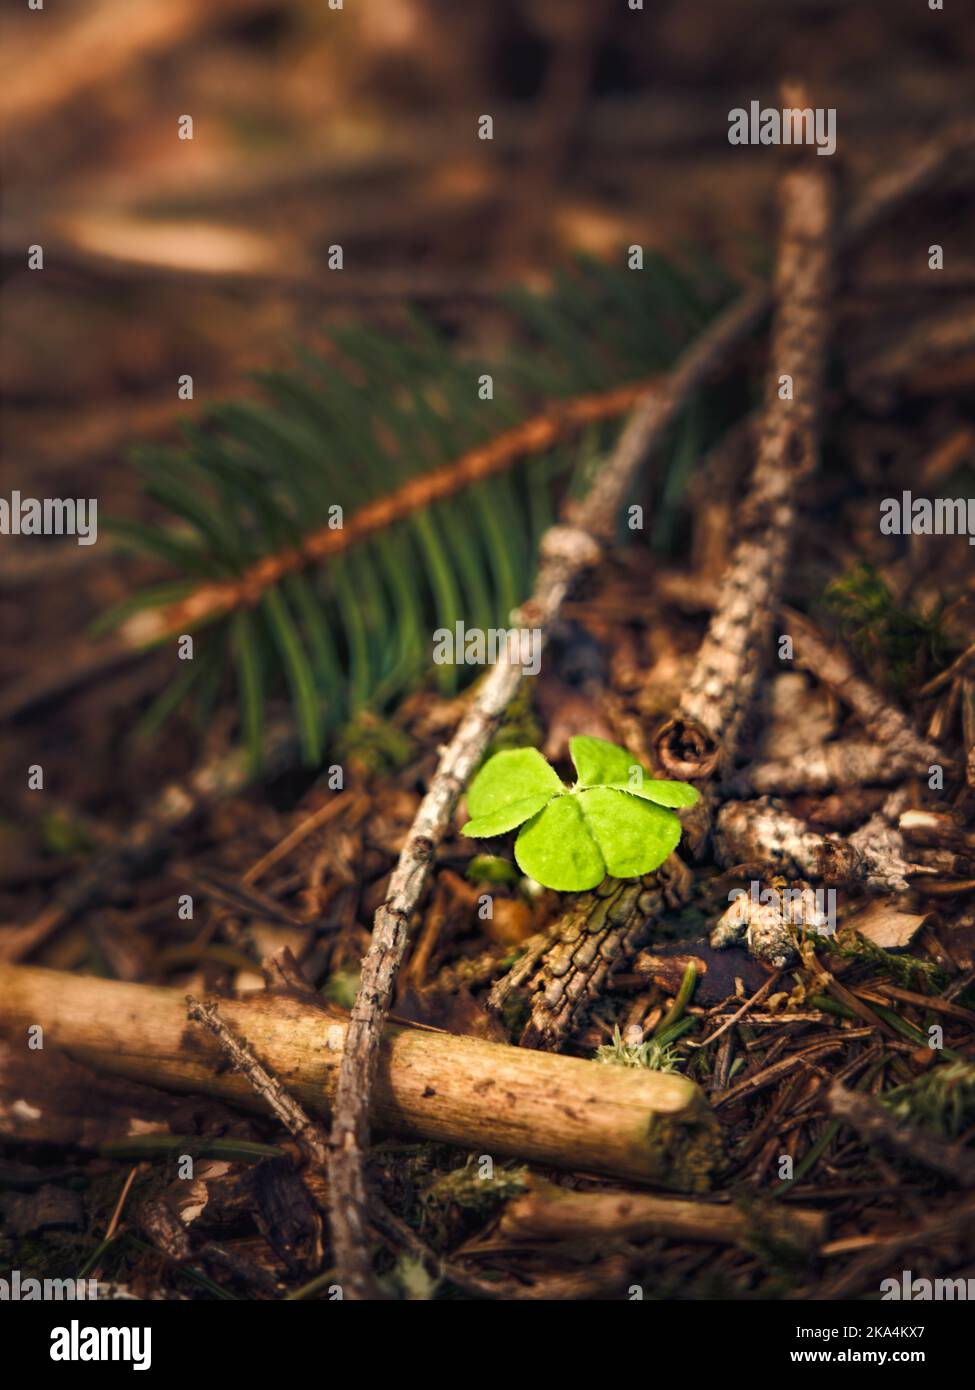 A shallow focus of a tiny cloverleaf surrounded by twigs in the forest Stock Photo